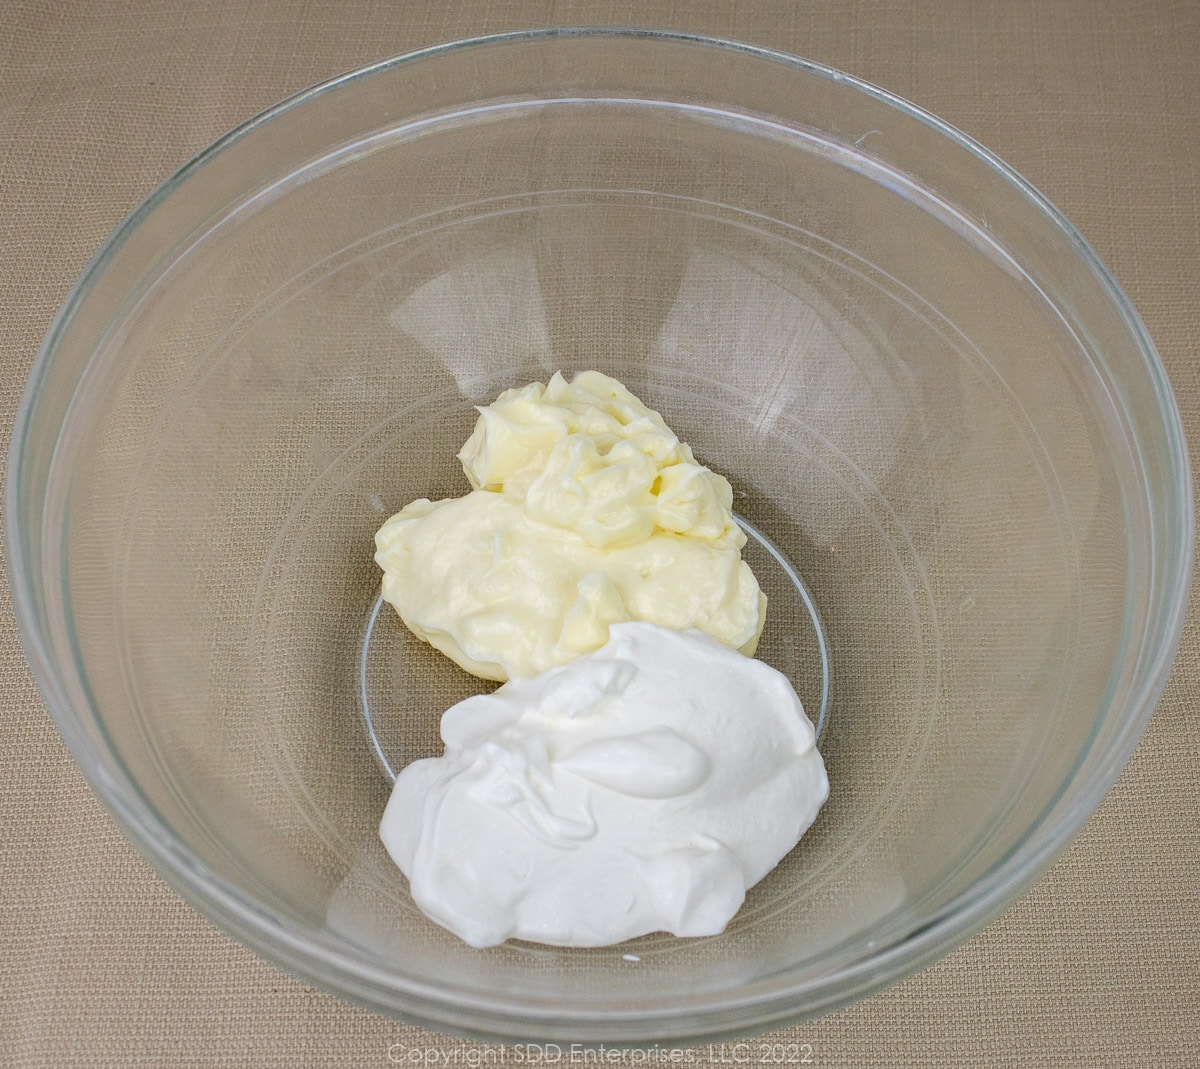 mayonnaise and sour cream in a glass bowl